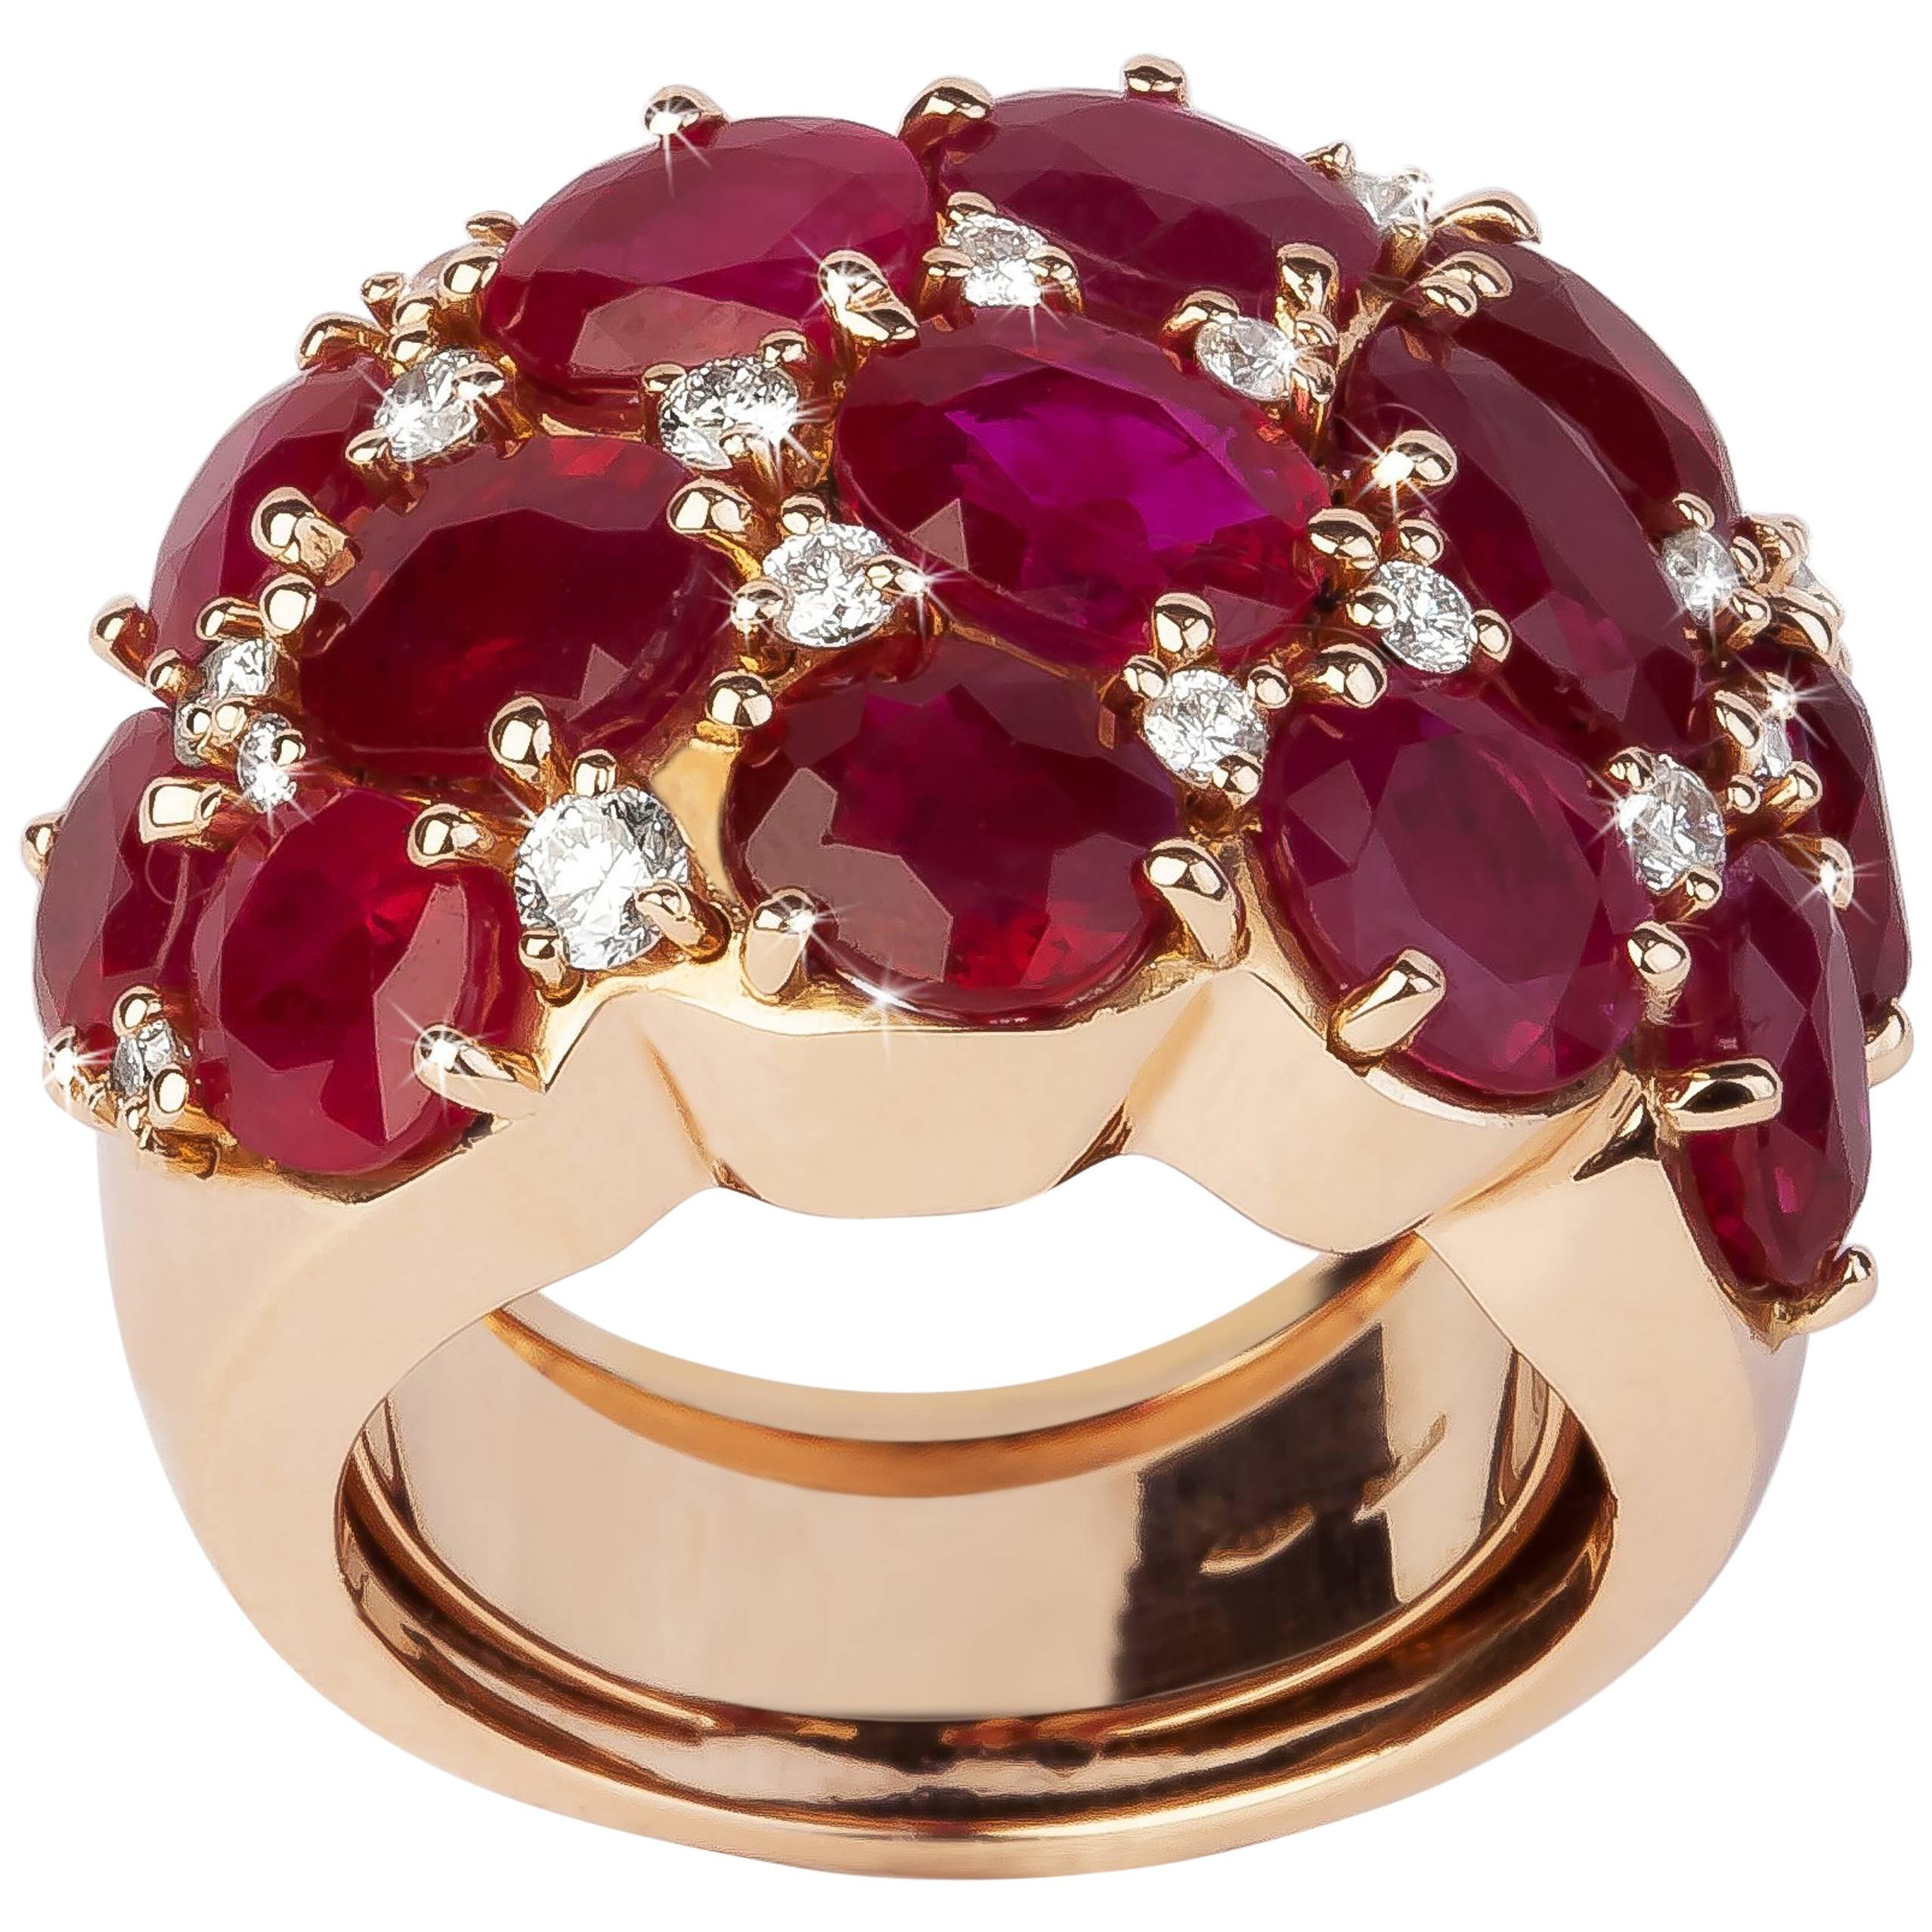 13.18 Carat Oval Cut Rubies, Round Diamonds, Valadier Dome Ring For Sale